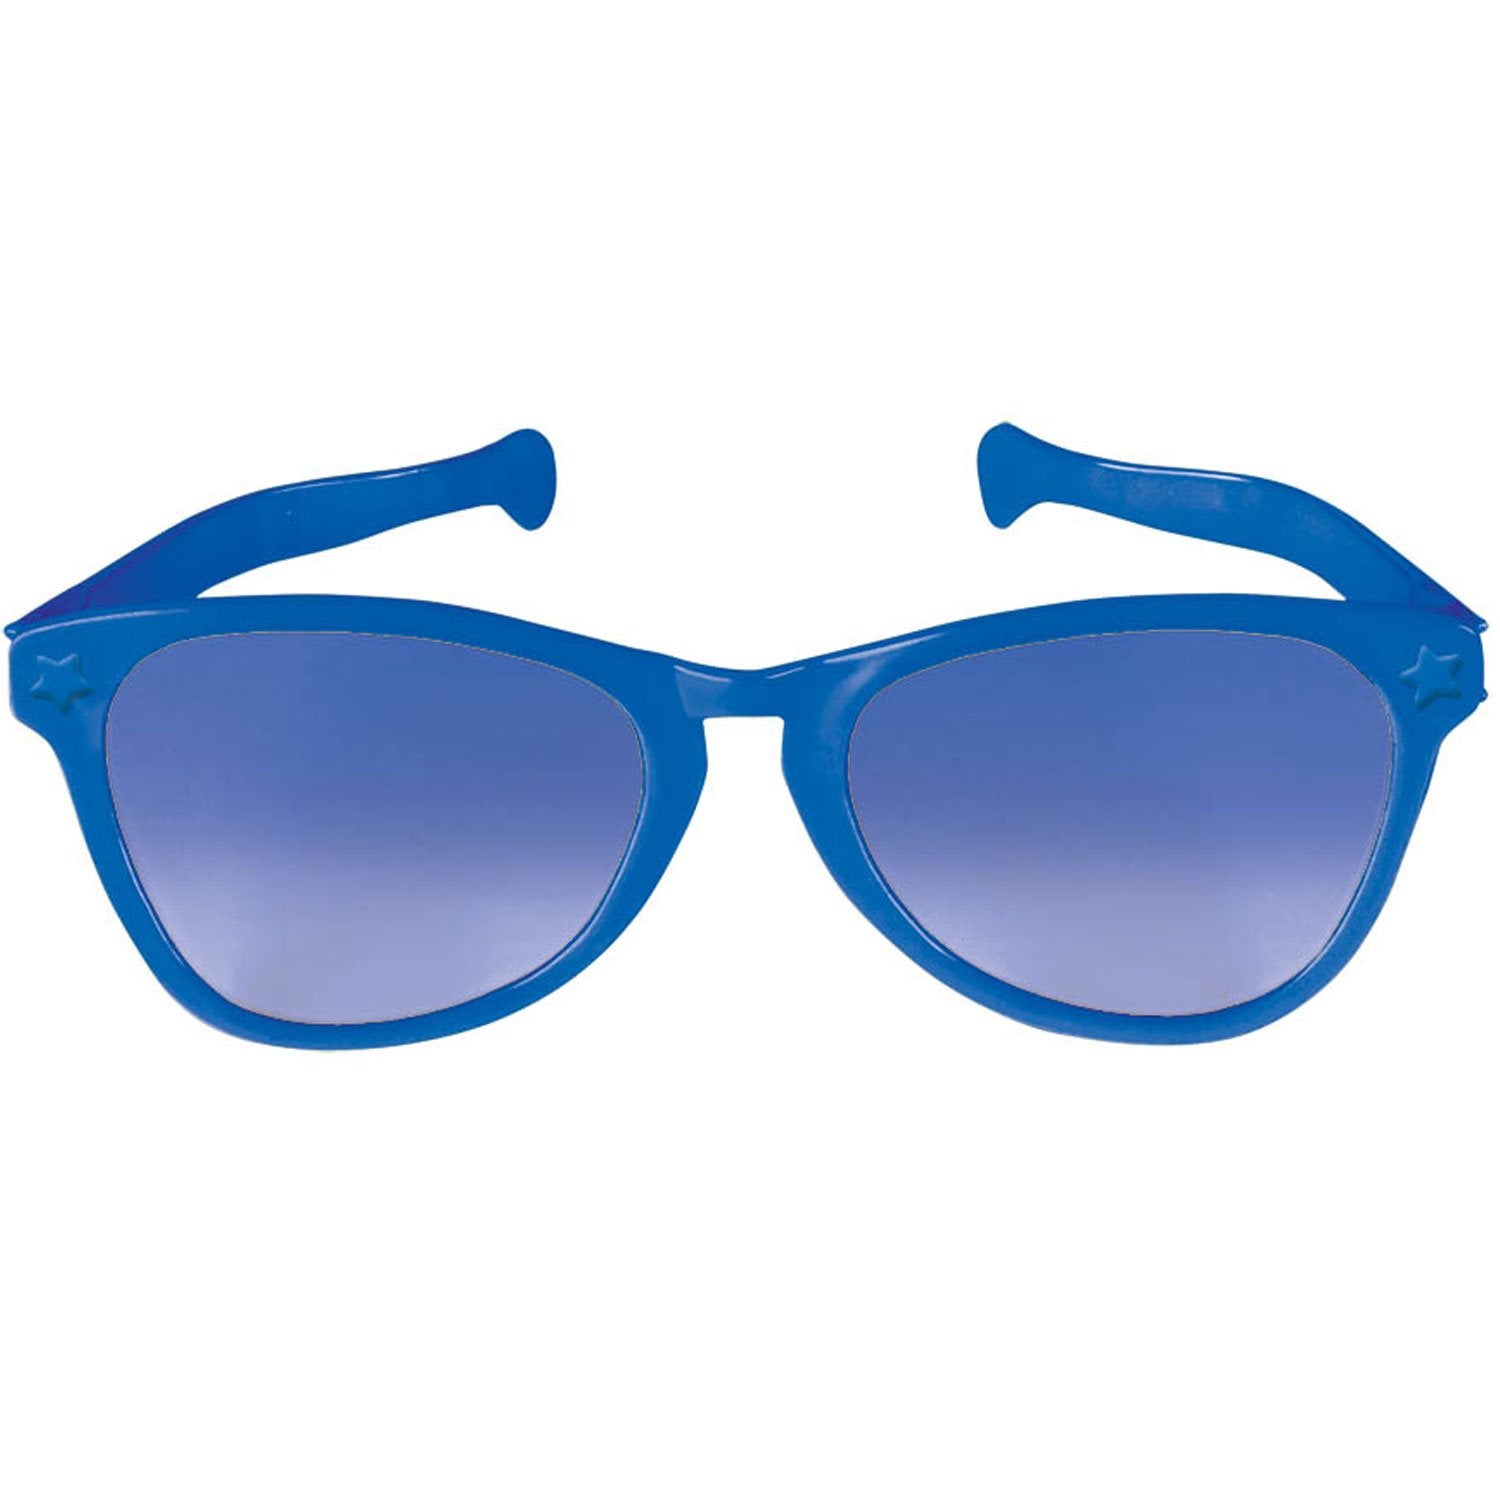 Blue Jumbo Glasses Costumes & Apparel - Party Centre - Party Centre